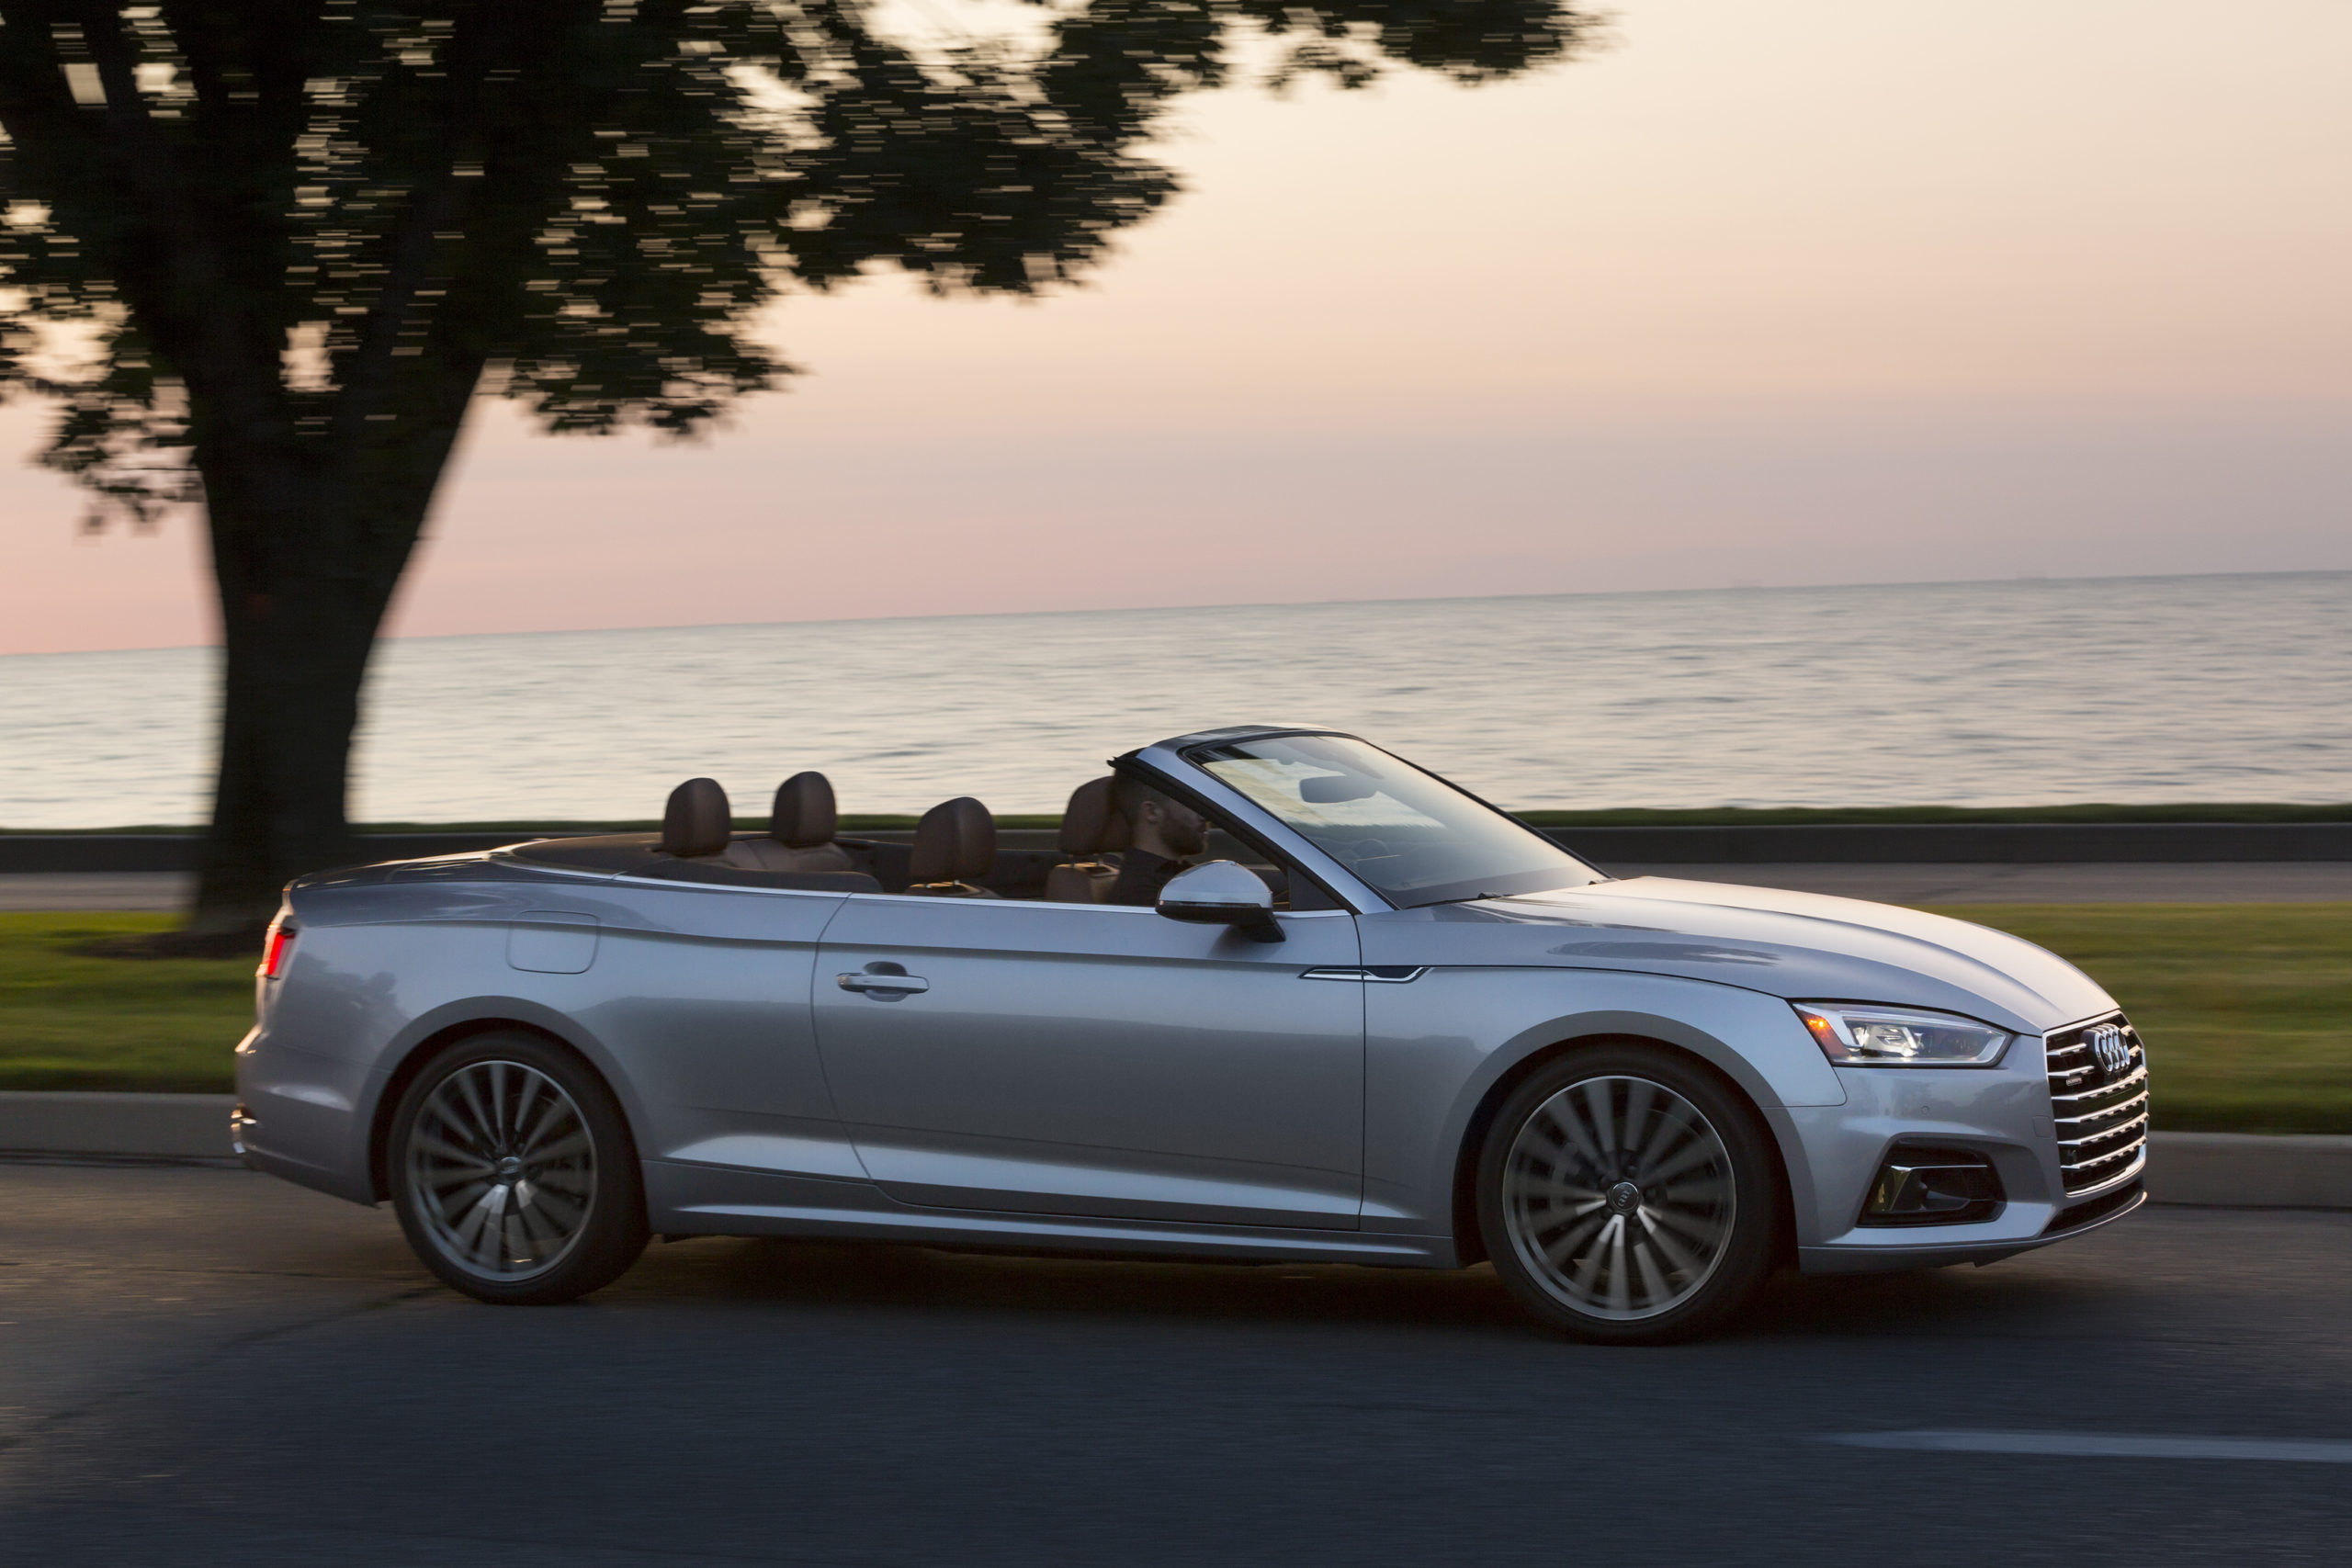 Silver 2021 Audi A5 Cabriolet - best 4 seat convertibles